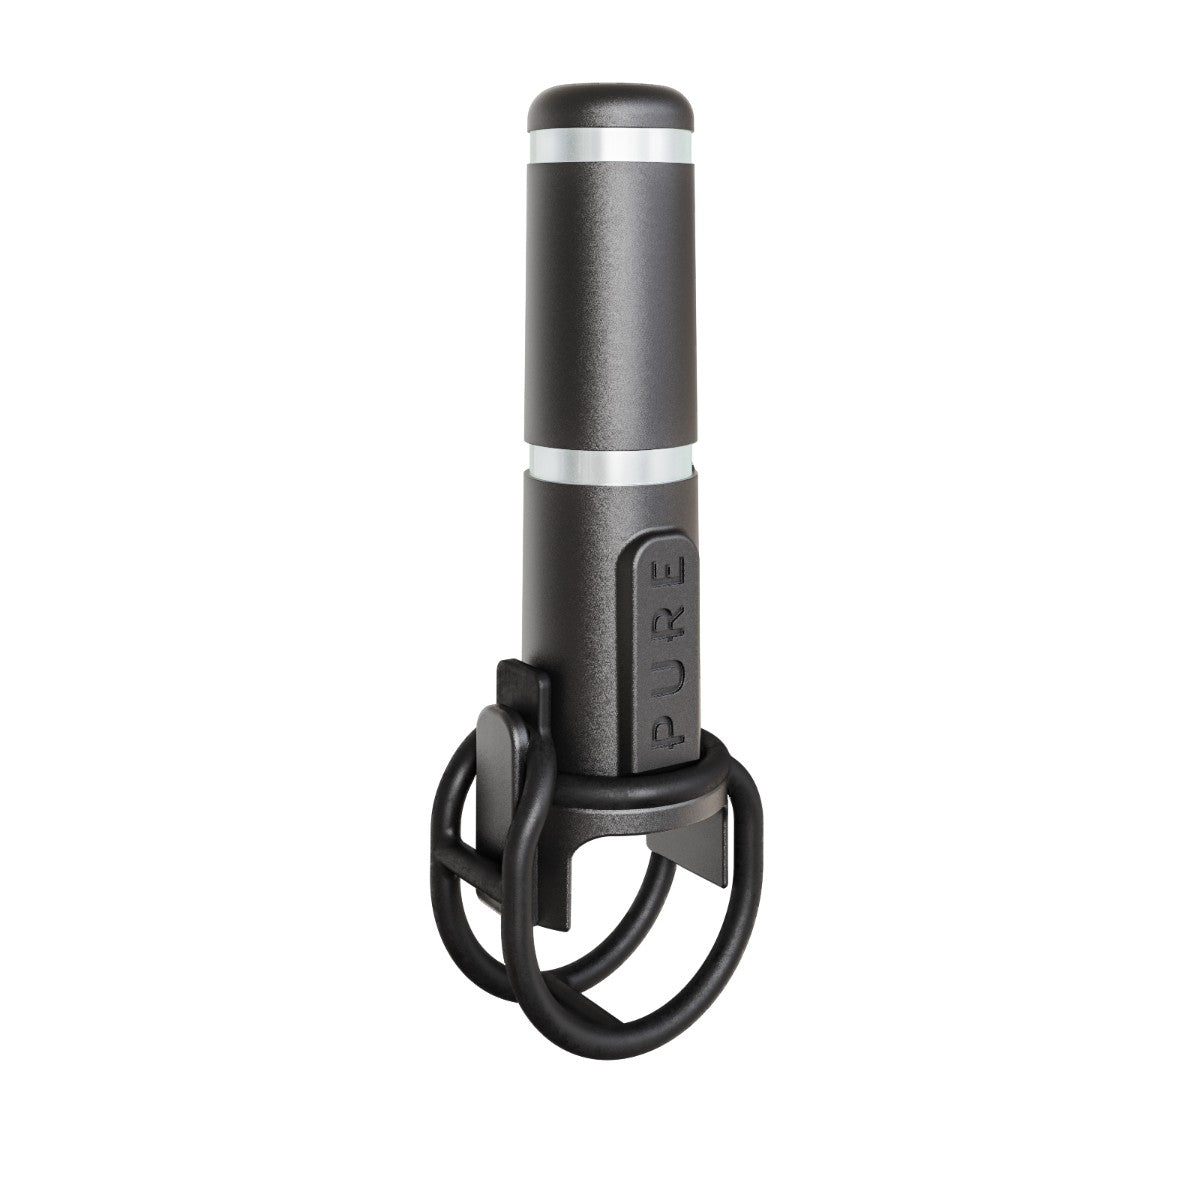 Pure Electric Scooter Light Mount - Only works with Pure Air 2nd Gen scooters